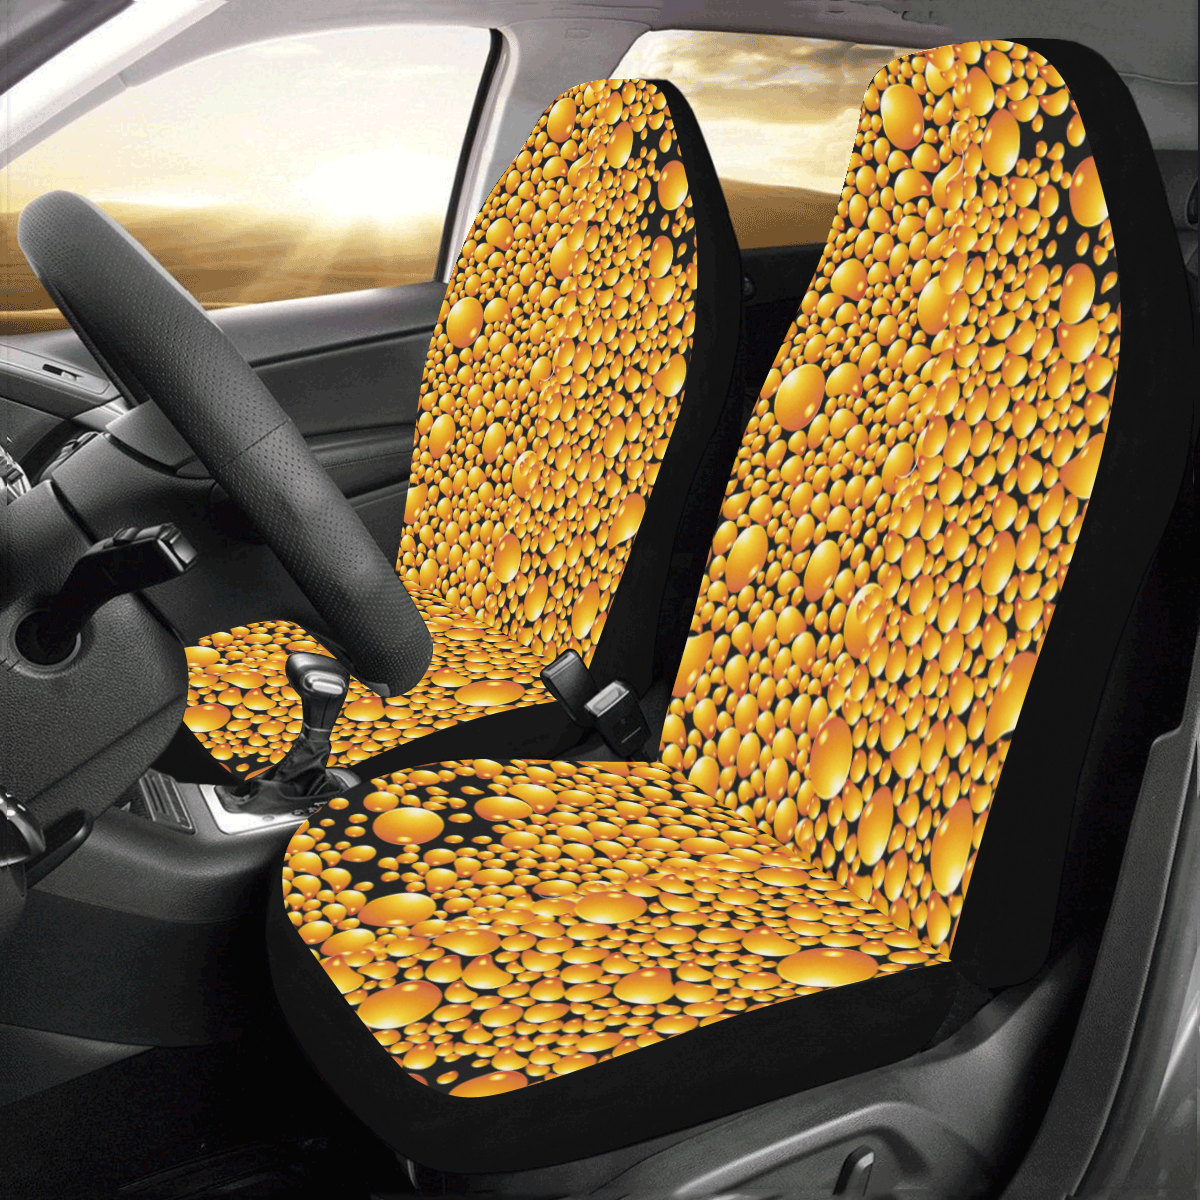 Yellow bubbles Car Seat Covers (Set of 2)